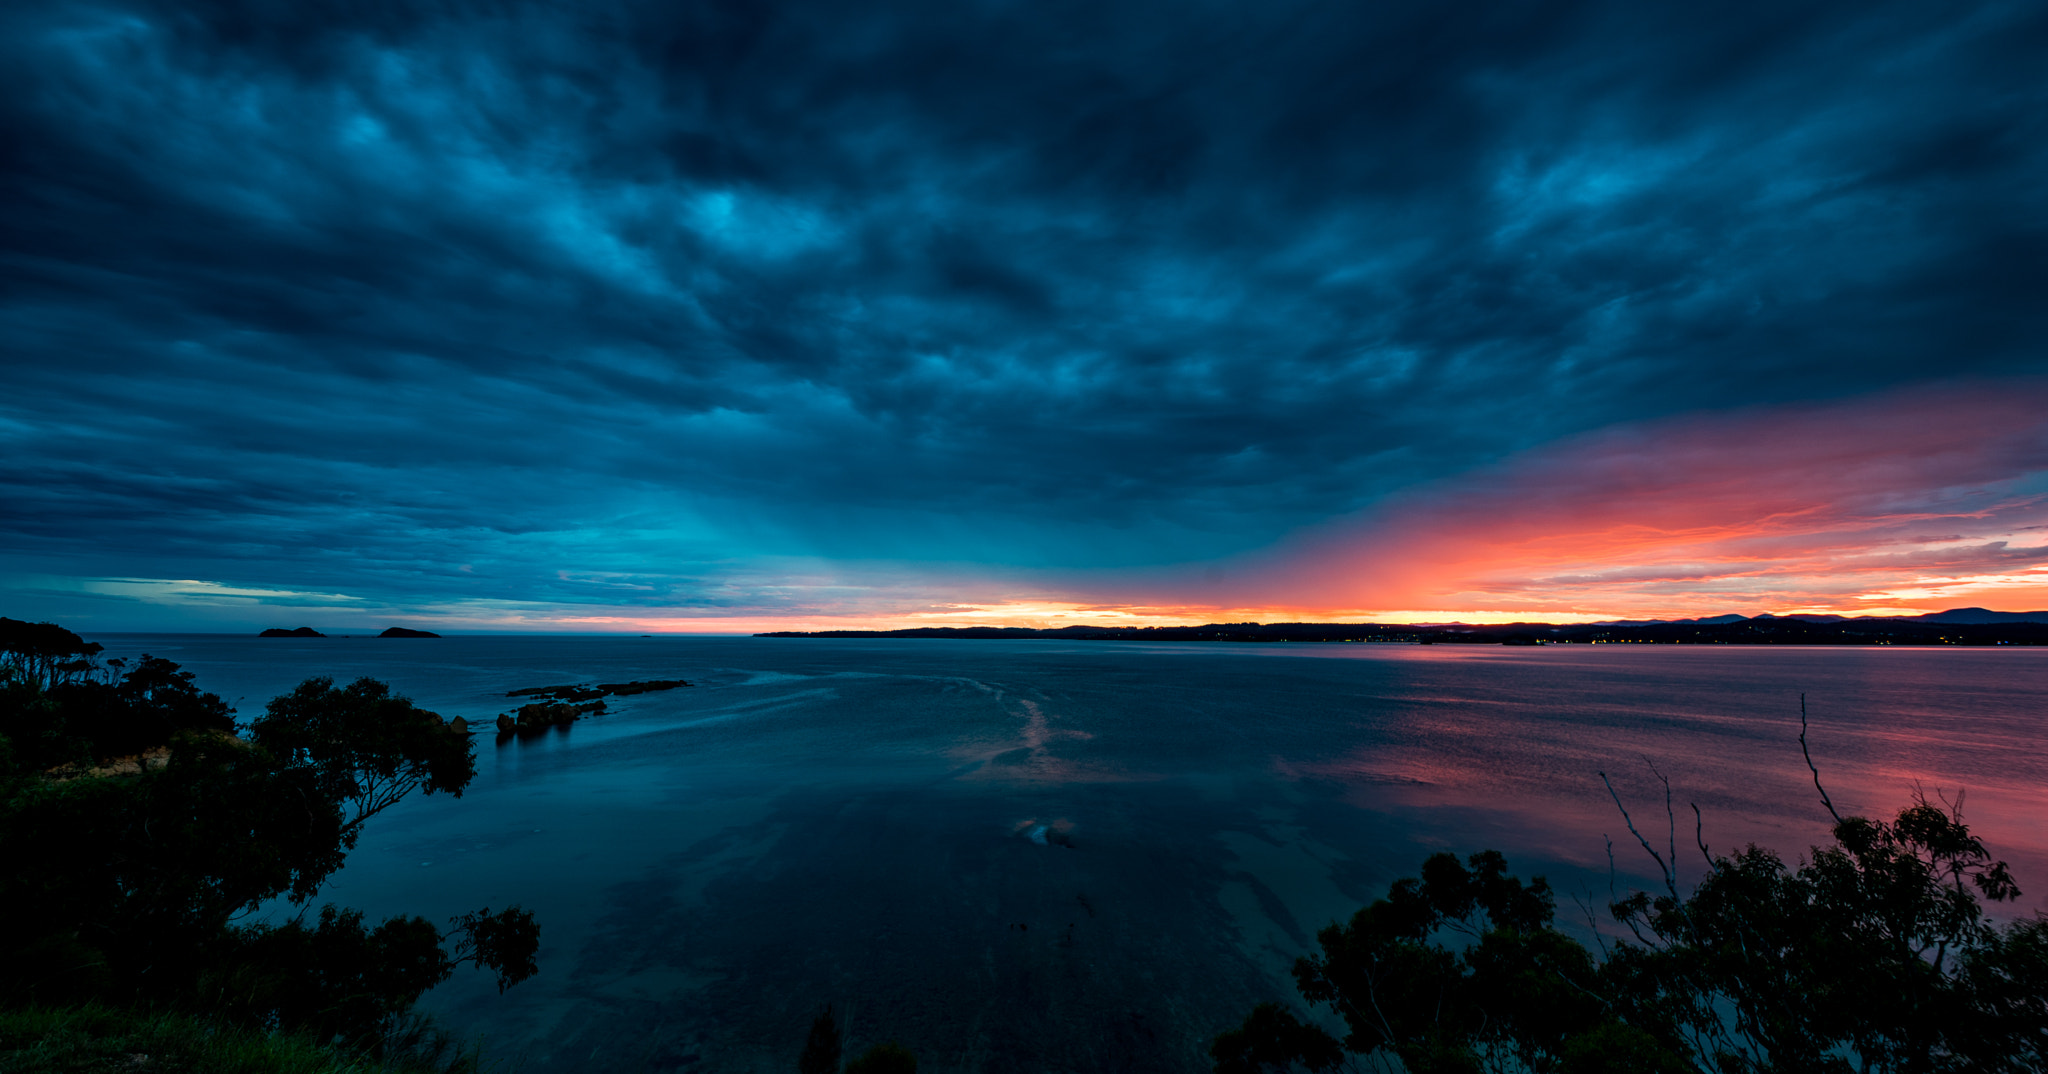 Nikon D750 + Tamron SP AF 10-24mm F3.5-4.5 Di II LD Aspherical (IF) sample photo. Sunset from the cliff tops photography